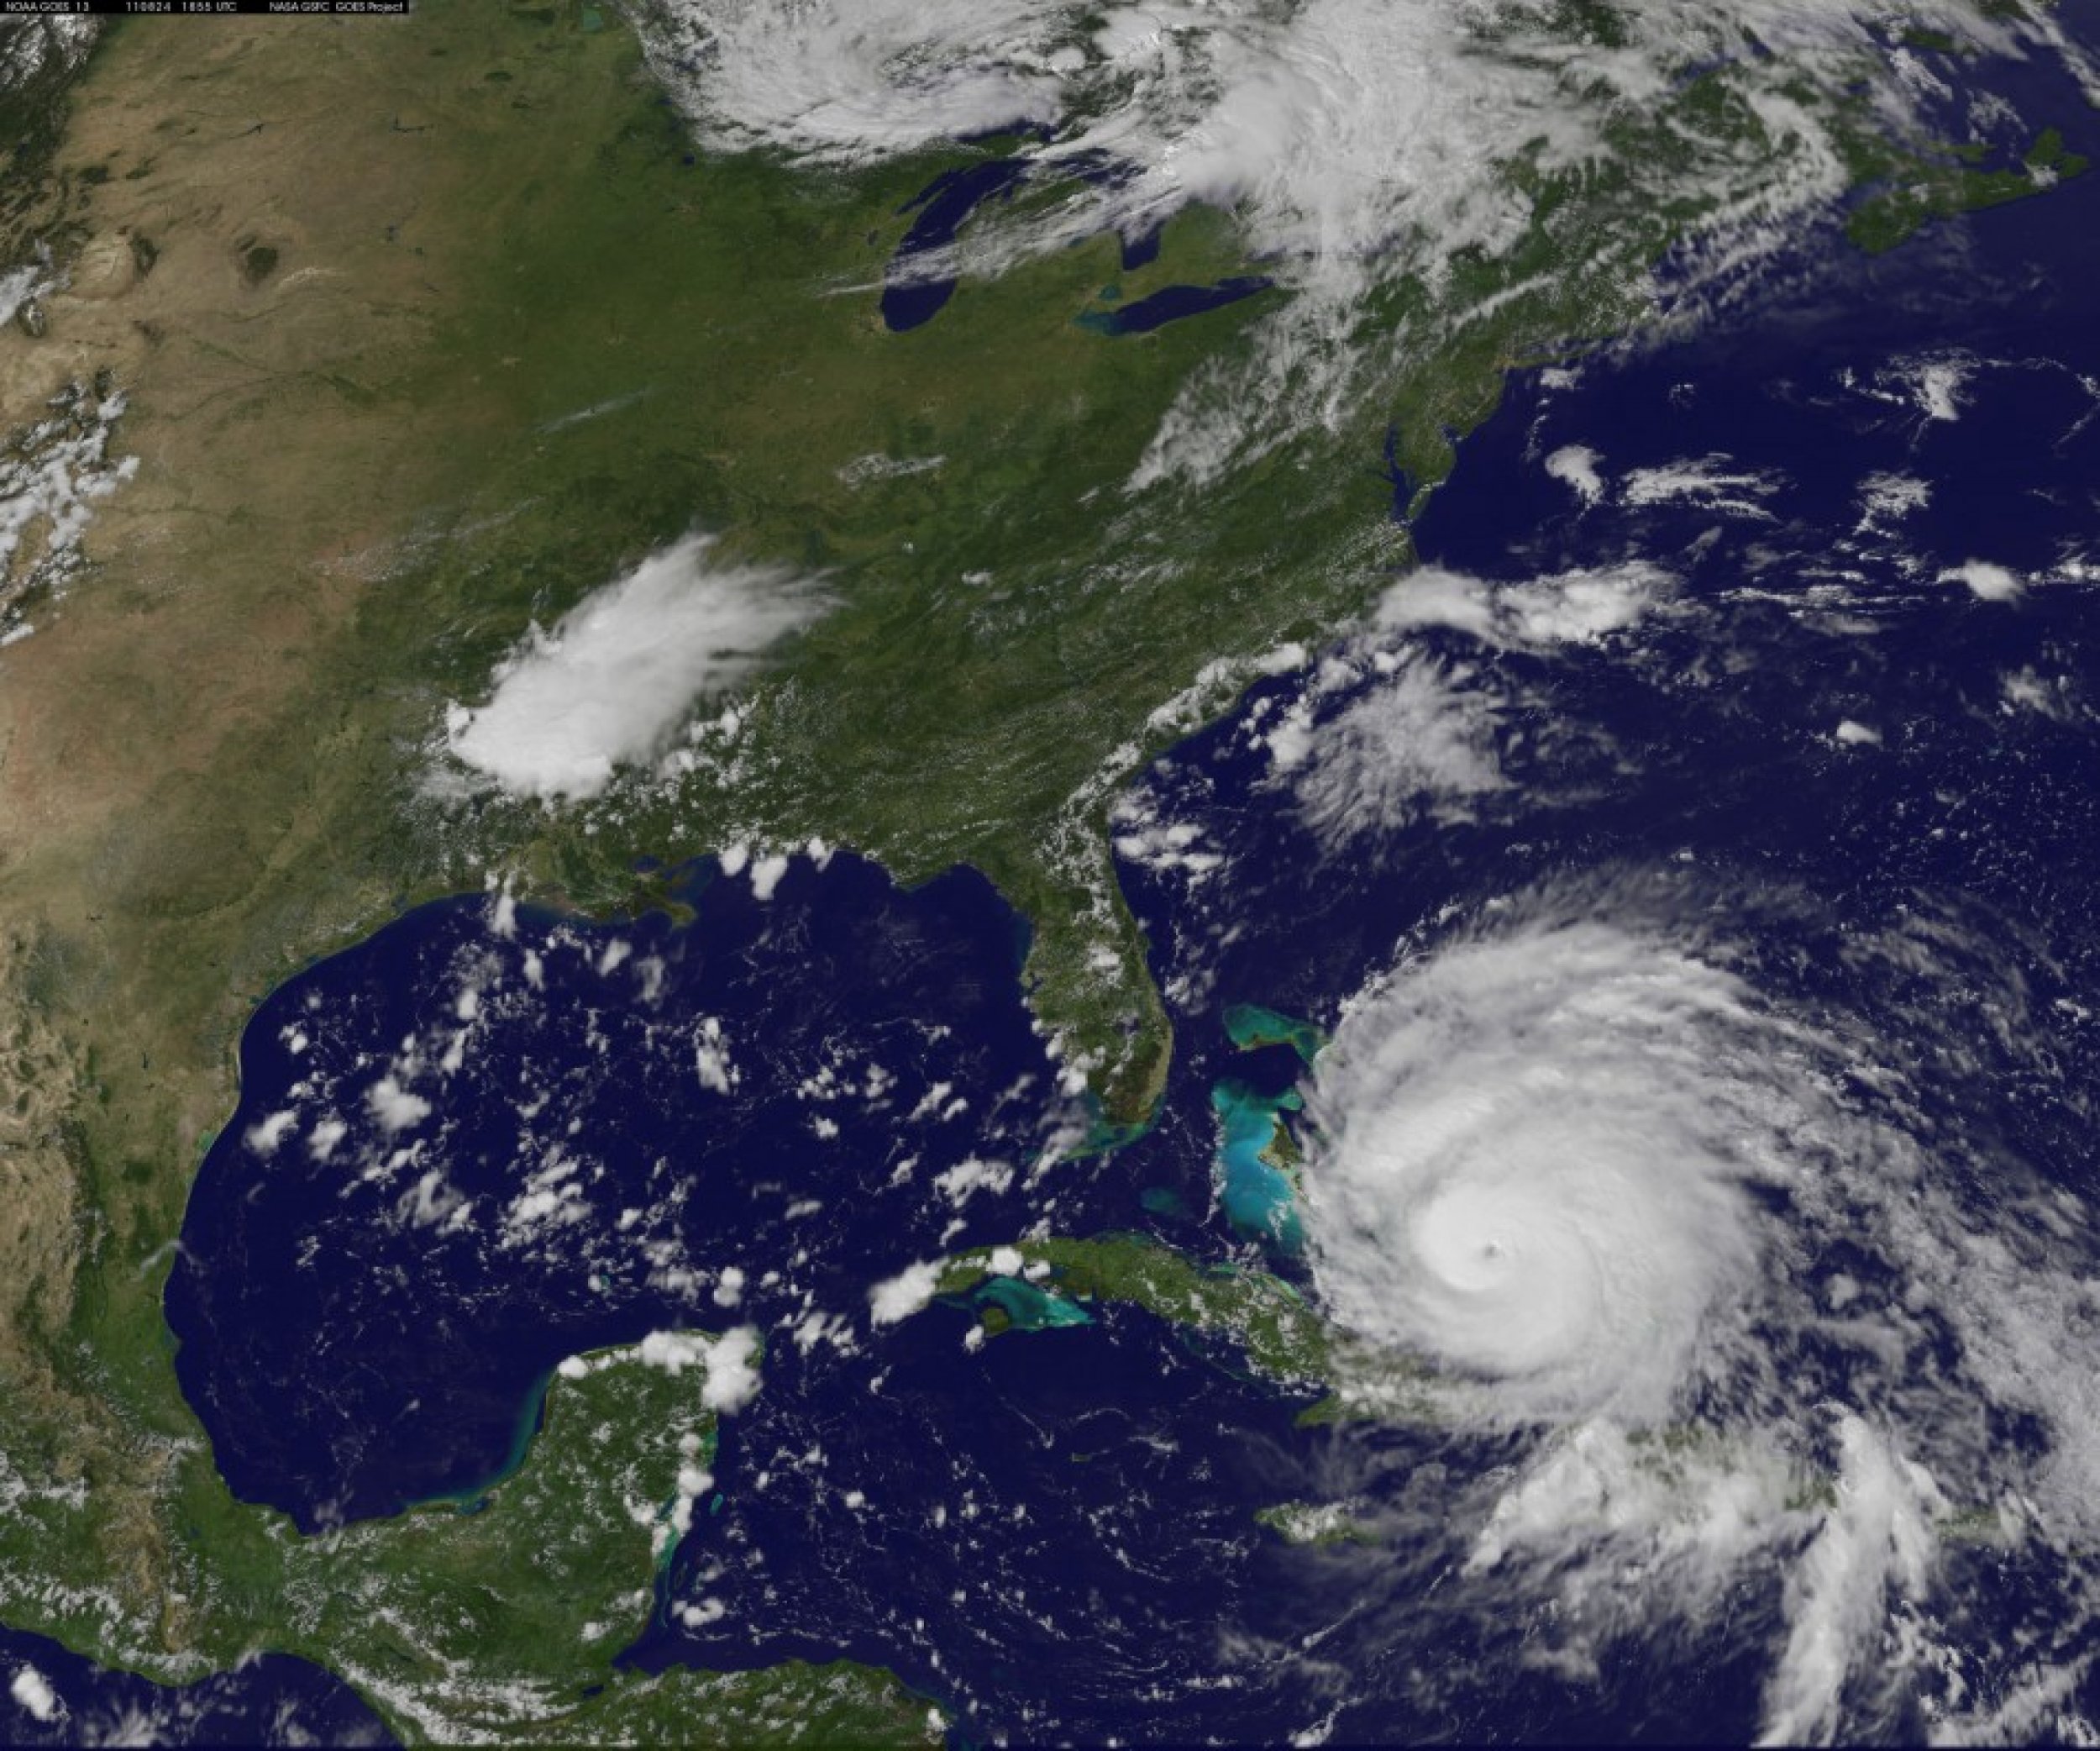 Hurricane Irene as Seen by the GOES Satellite on August 24, 2011